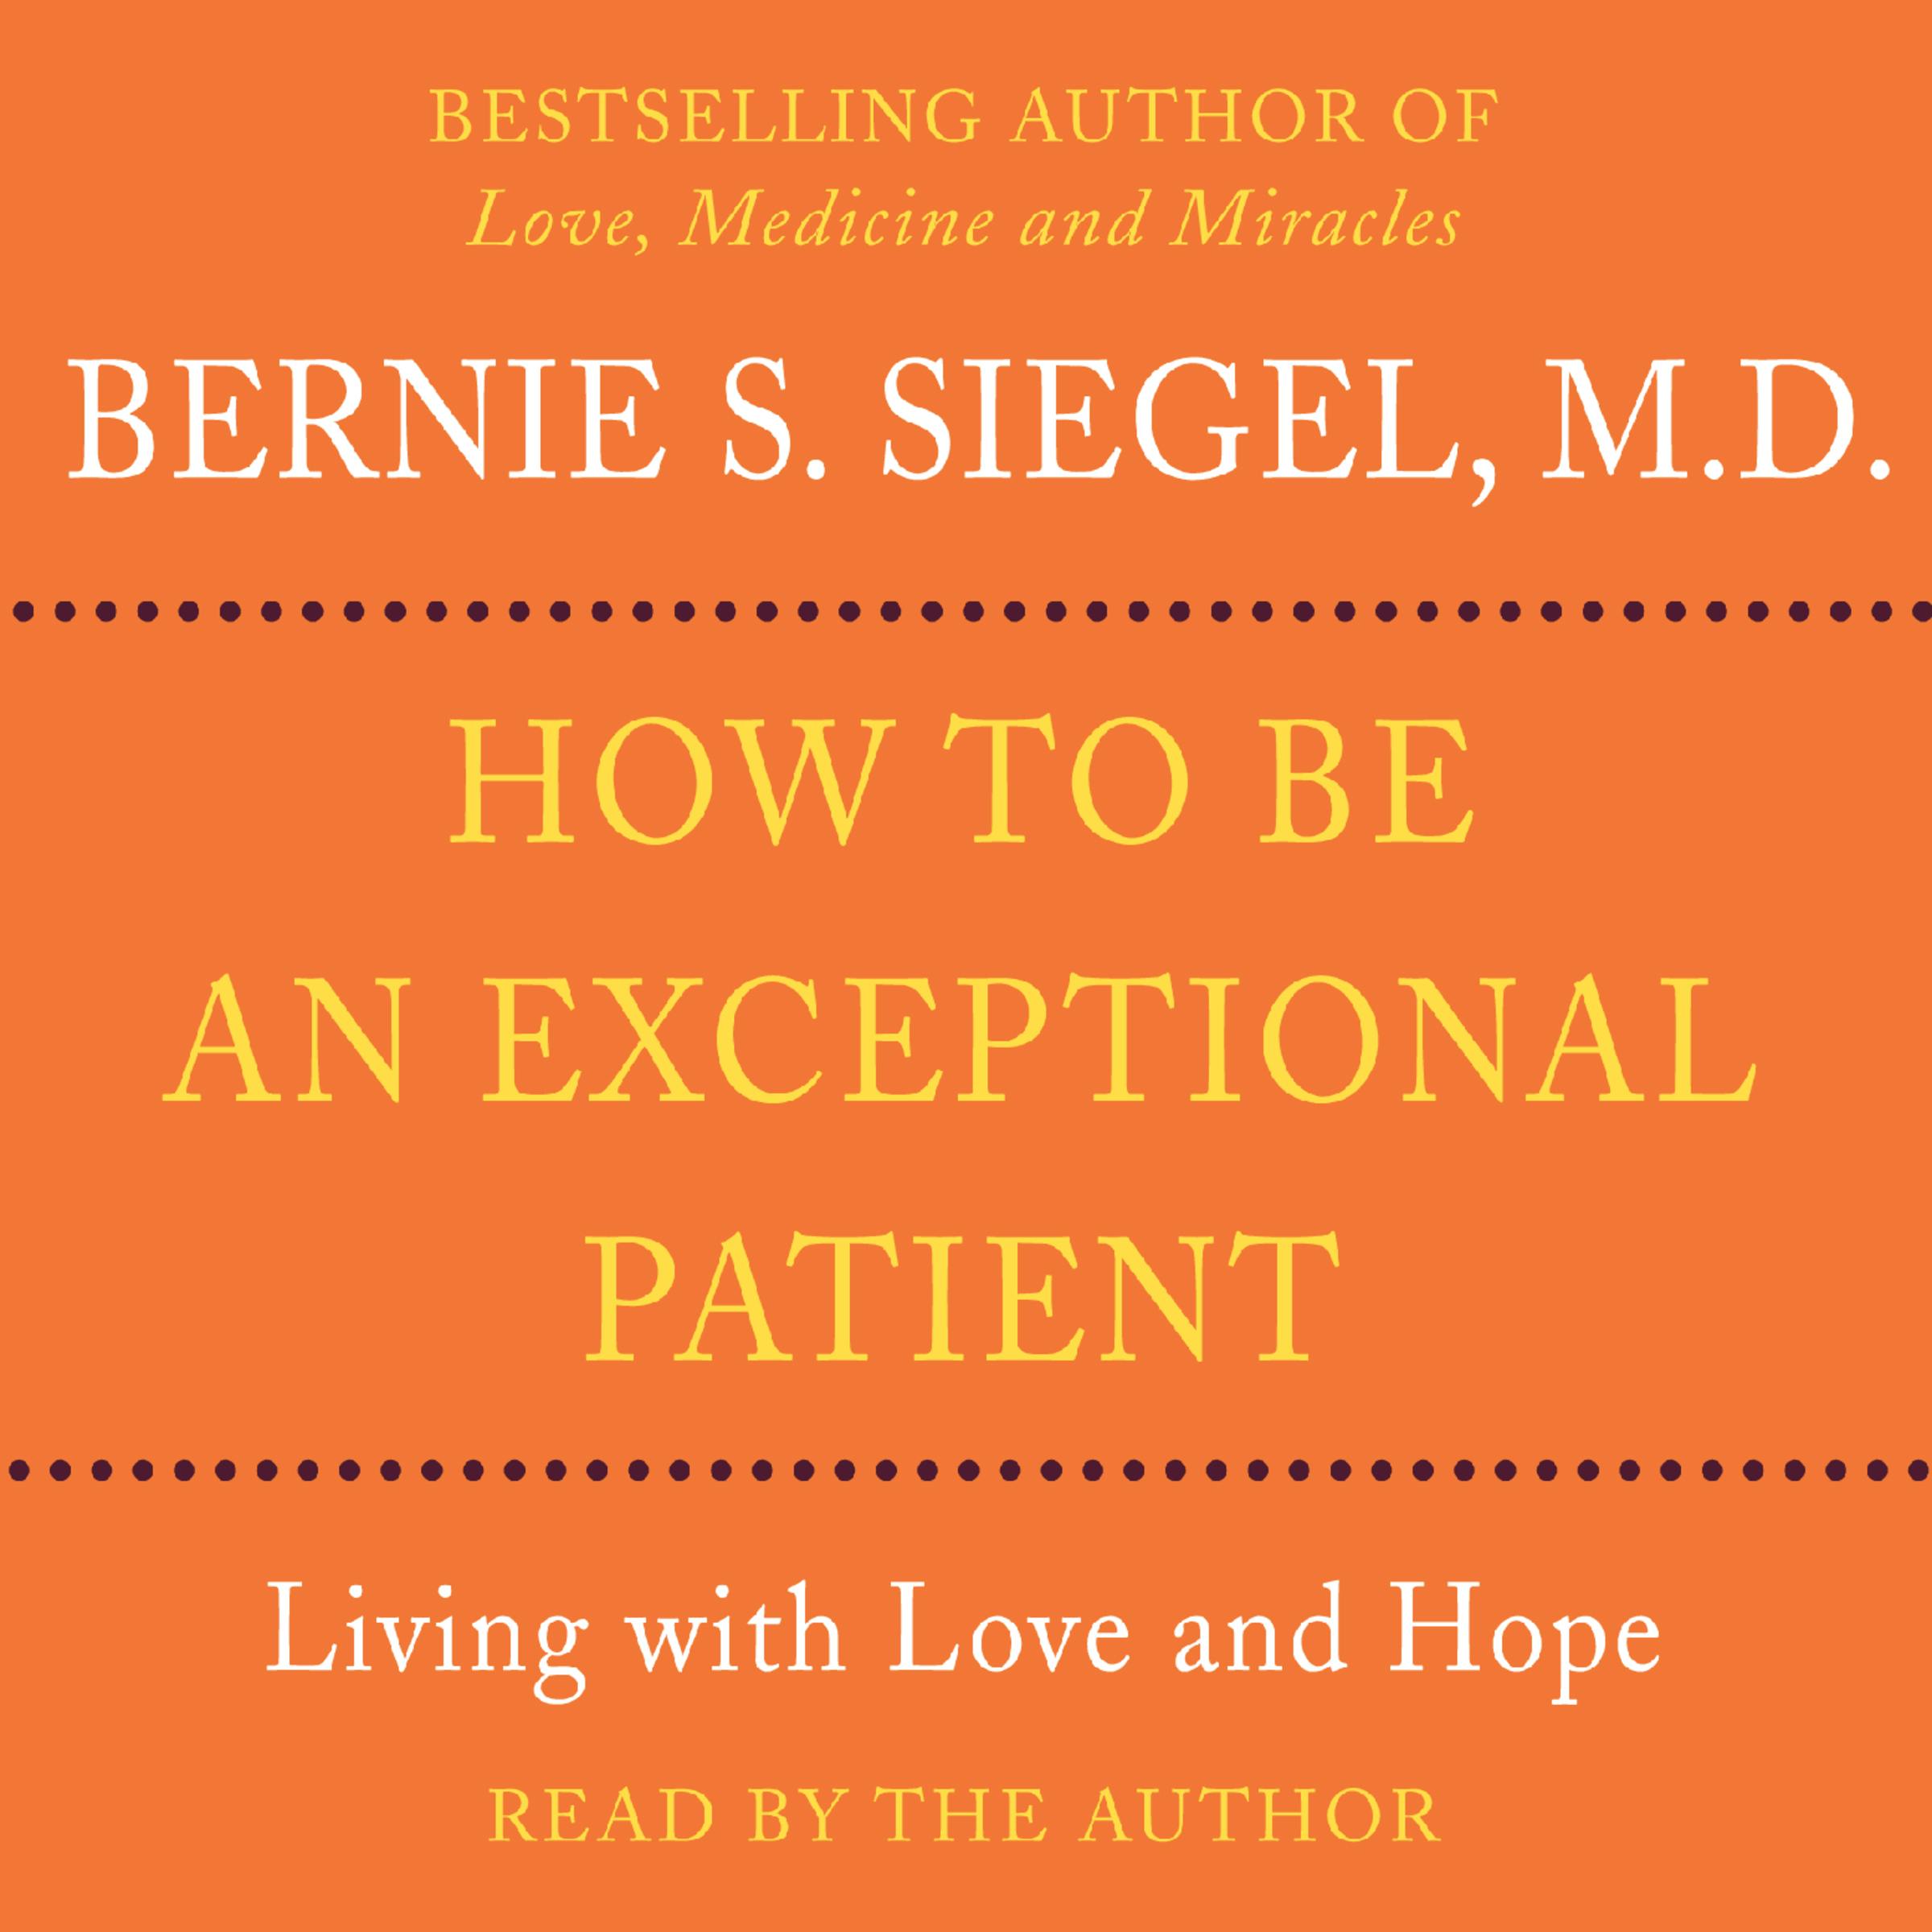 How to Be An Exceptional Patient - Bernie S. Siegel